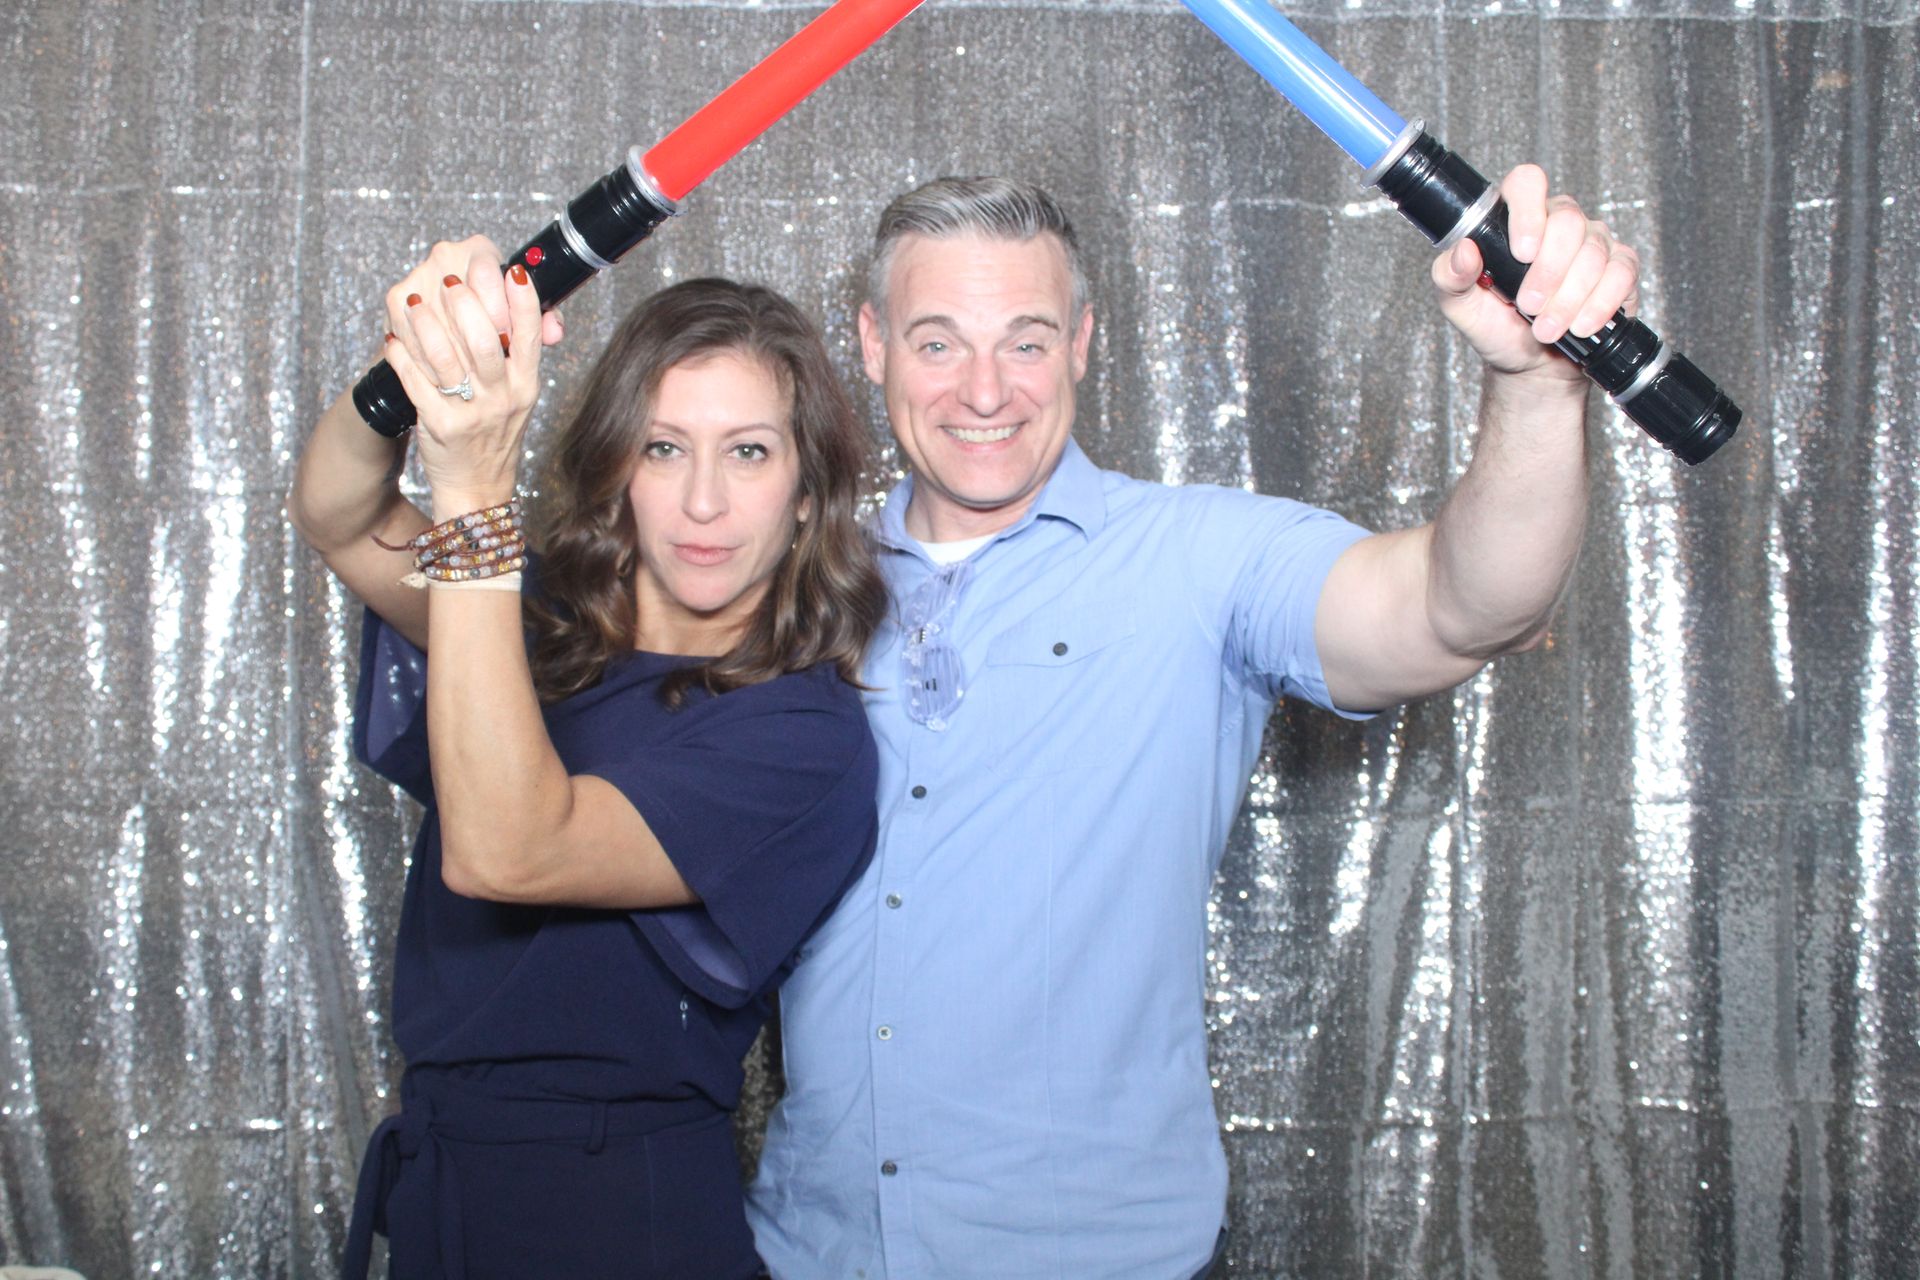 A man and a woman holding lightsabers playfully posing in the 360 Photo Booth.